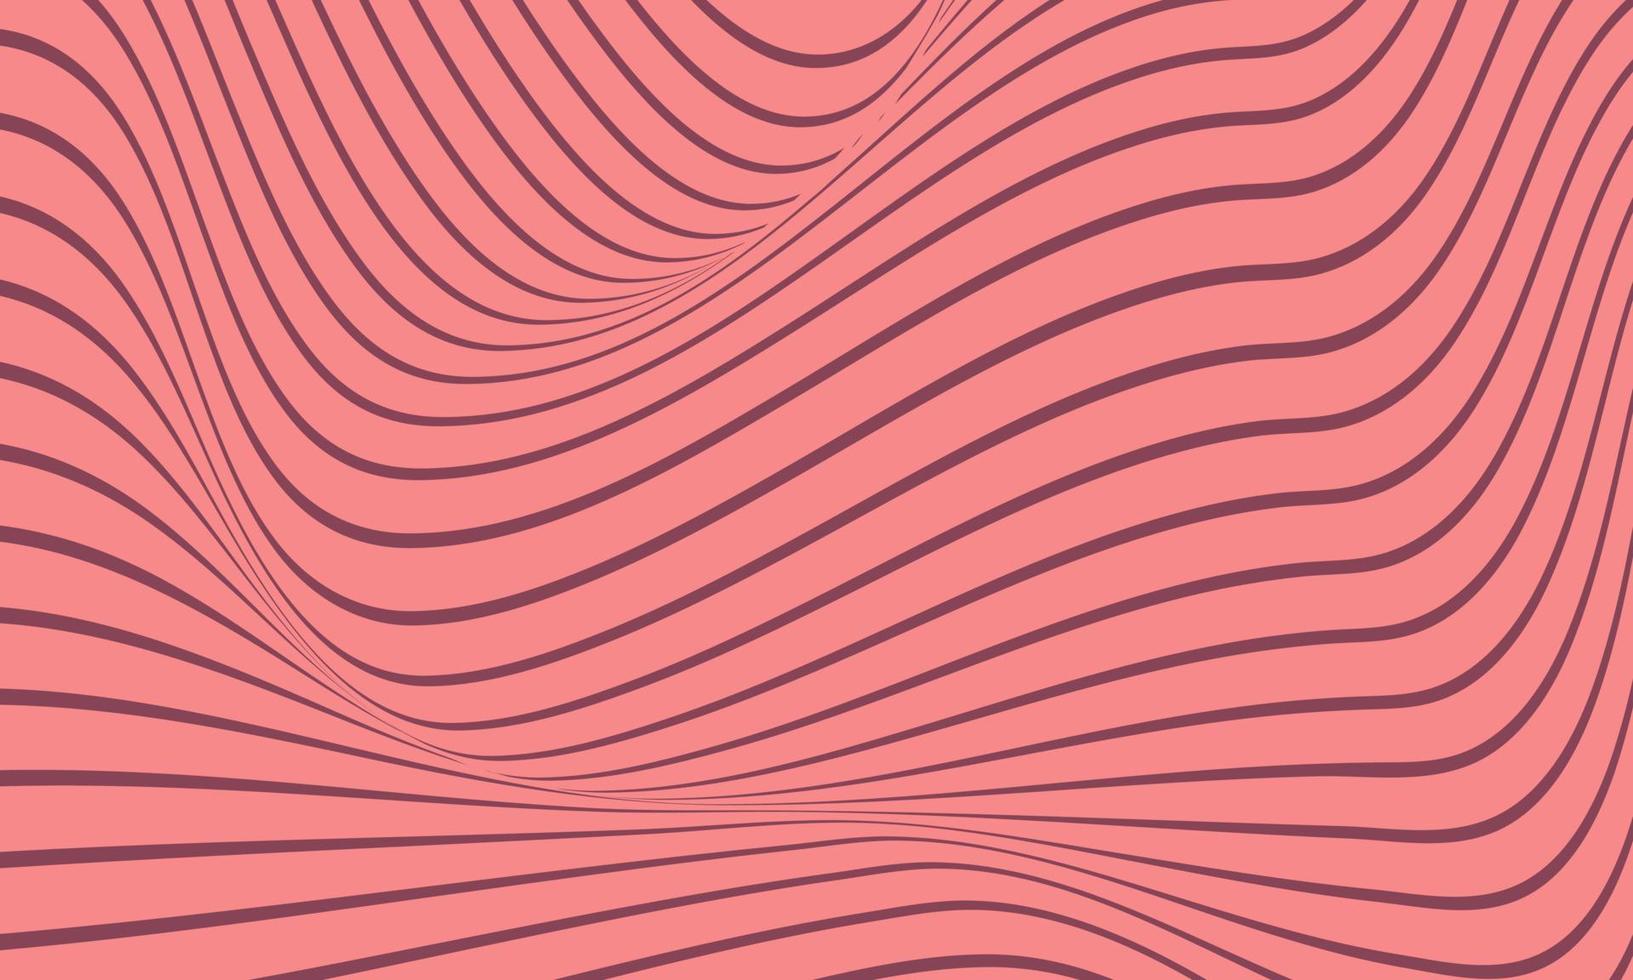 Abstract pink stripe background with wavy lines pattern. vector